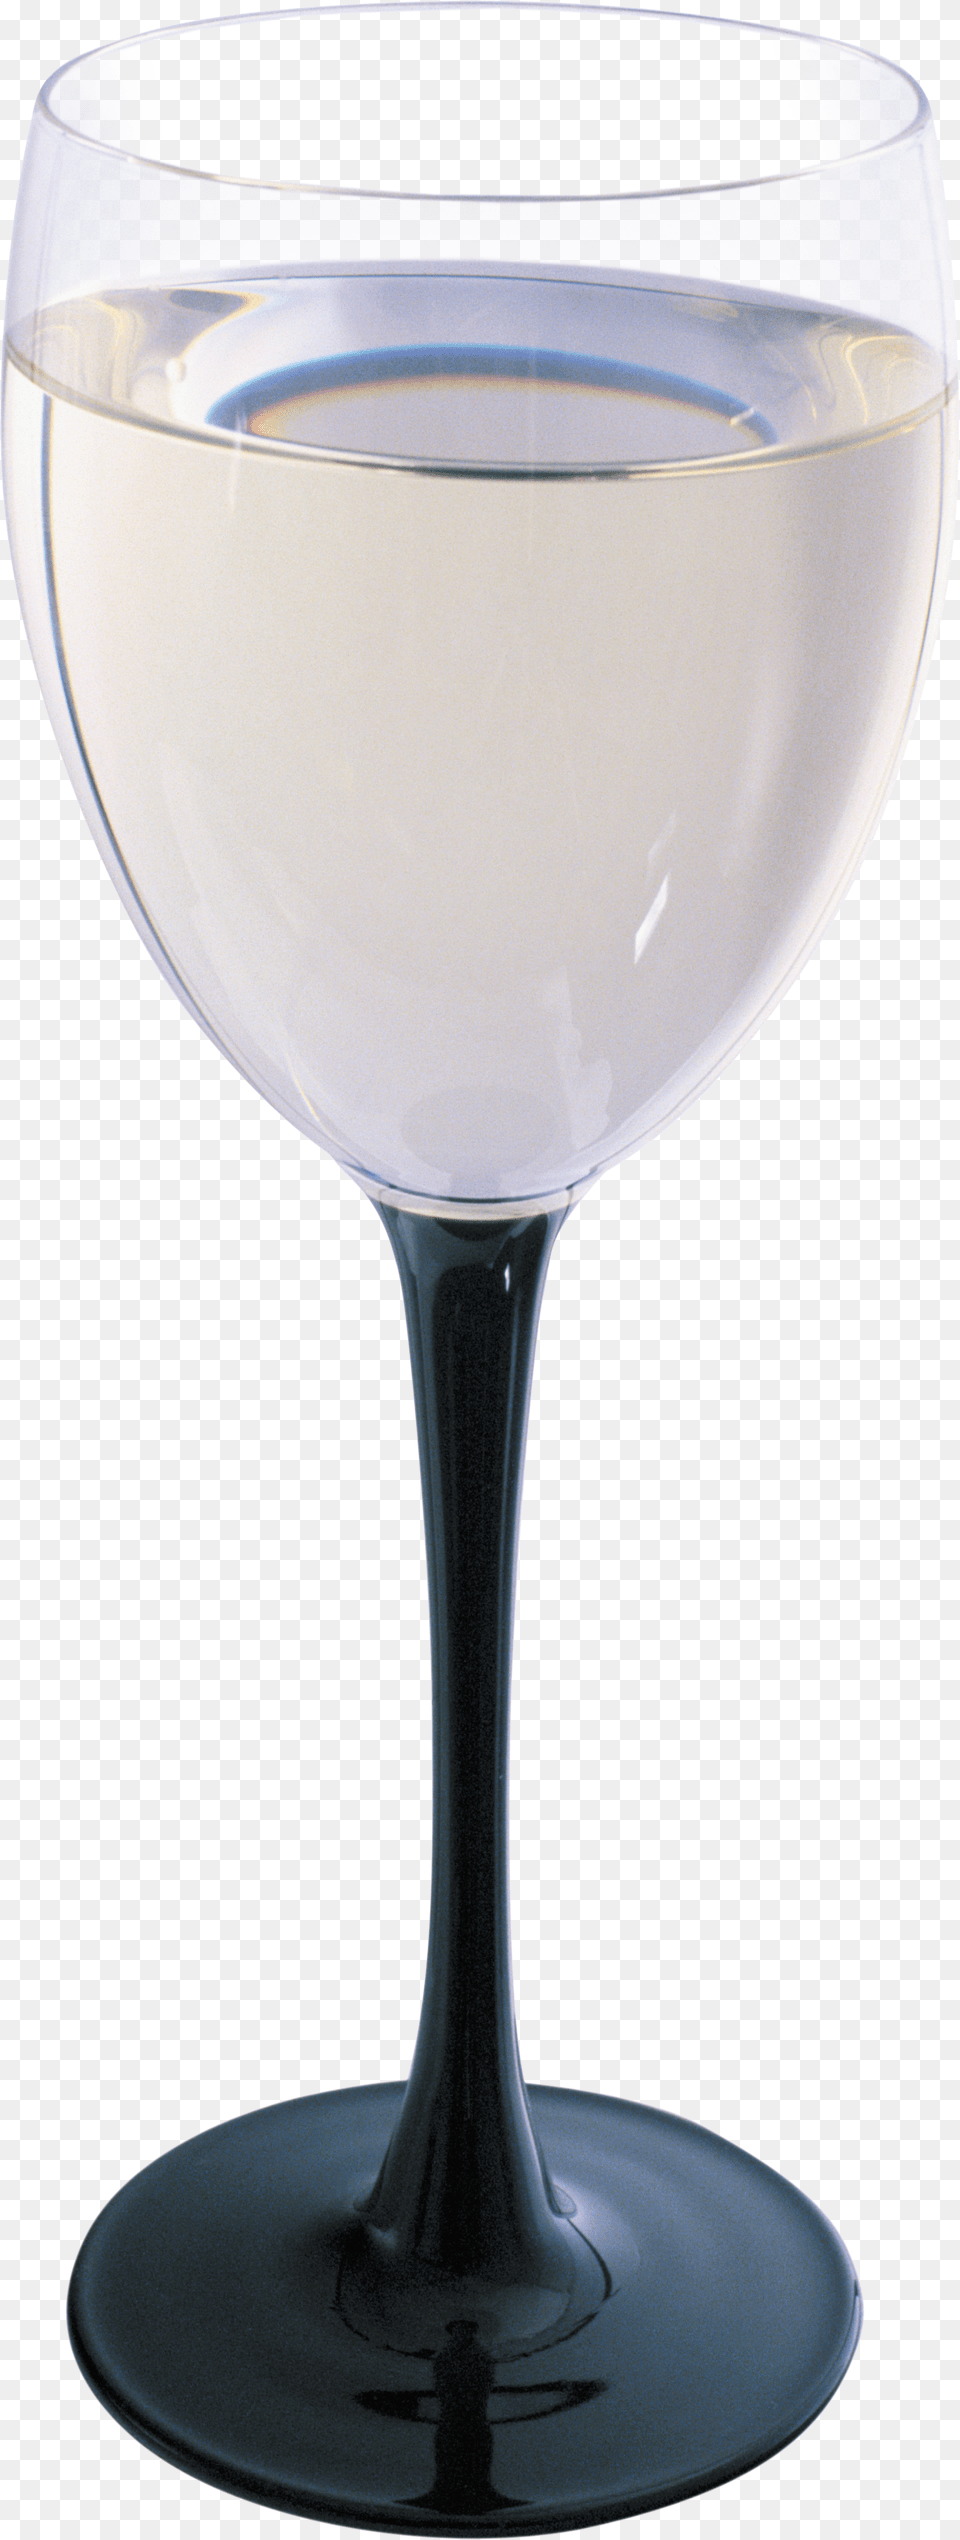 Wineglass Png Image